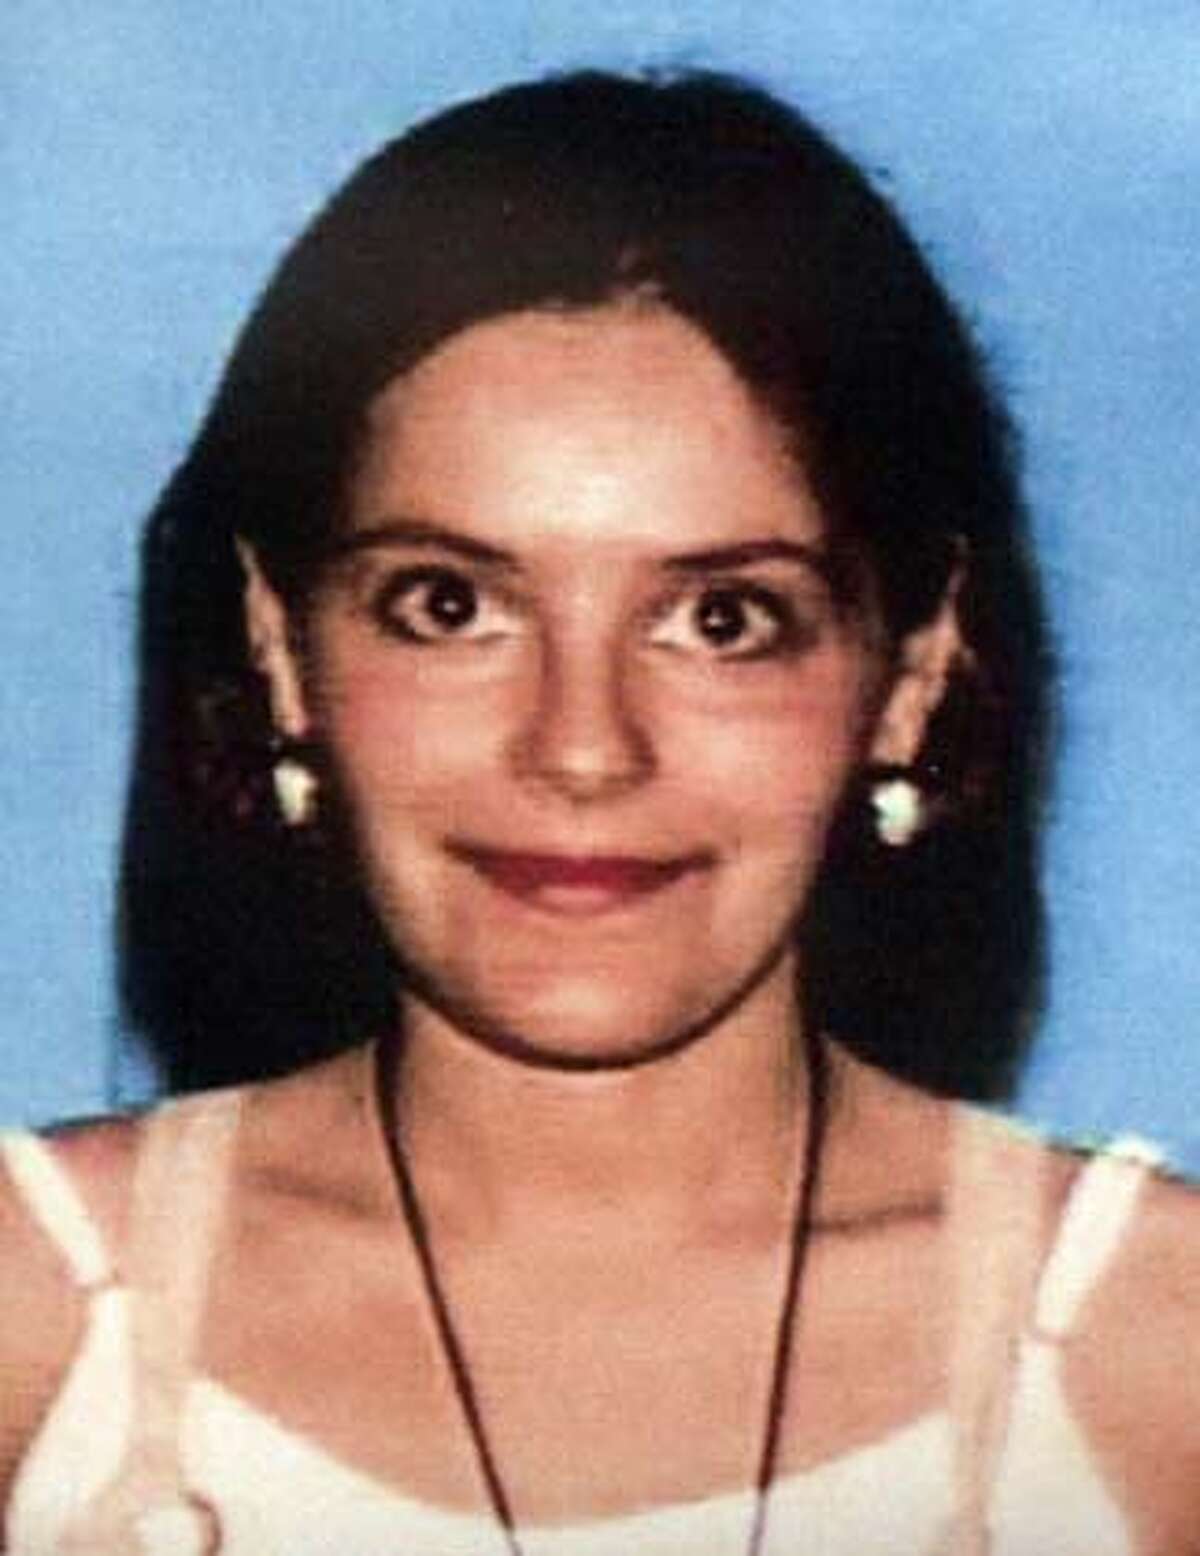 ** FILE ** Nina Reiser is seen in this 1999 California DMV photo.On a late summer day last year, Nina Reiser dropped her two kids off at her estranged husband's house in the Oakland hills and vanished into thin air. Prosecutors say that's because Hans Reiser killed her. His defense attorney says with no body ever recovered there's no case and suggests she may yet be alive in her native Russia. The unusual case begins Monday, Nov. 5, 2007, when opening statements are scheduled. (AP Photo/DMV photo via The Oakland Tribune) **NO SALES MAGS OUT NO INTERNET MANDATORY CREDIT **